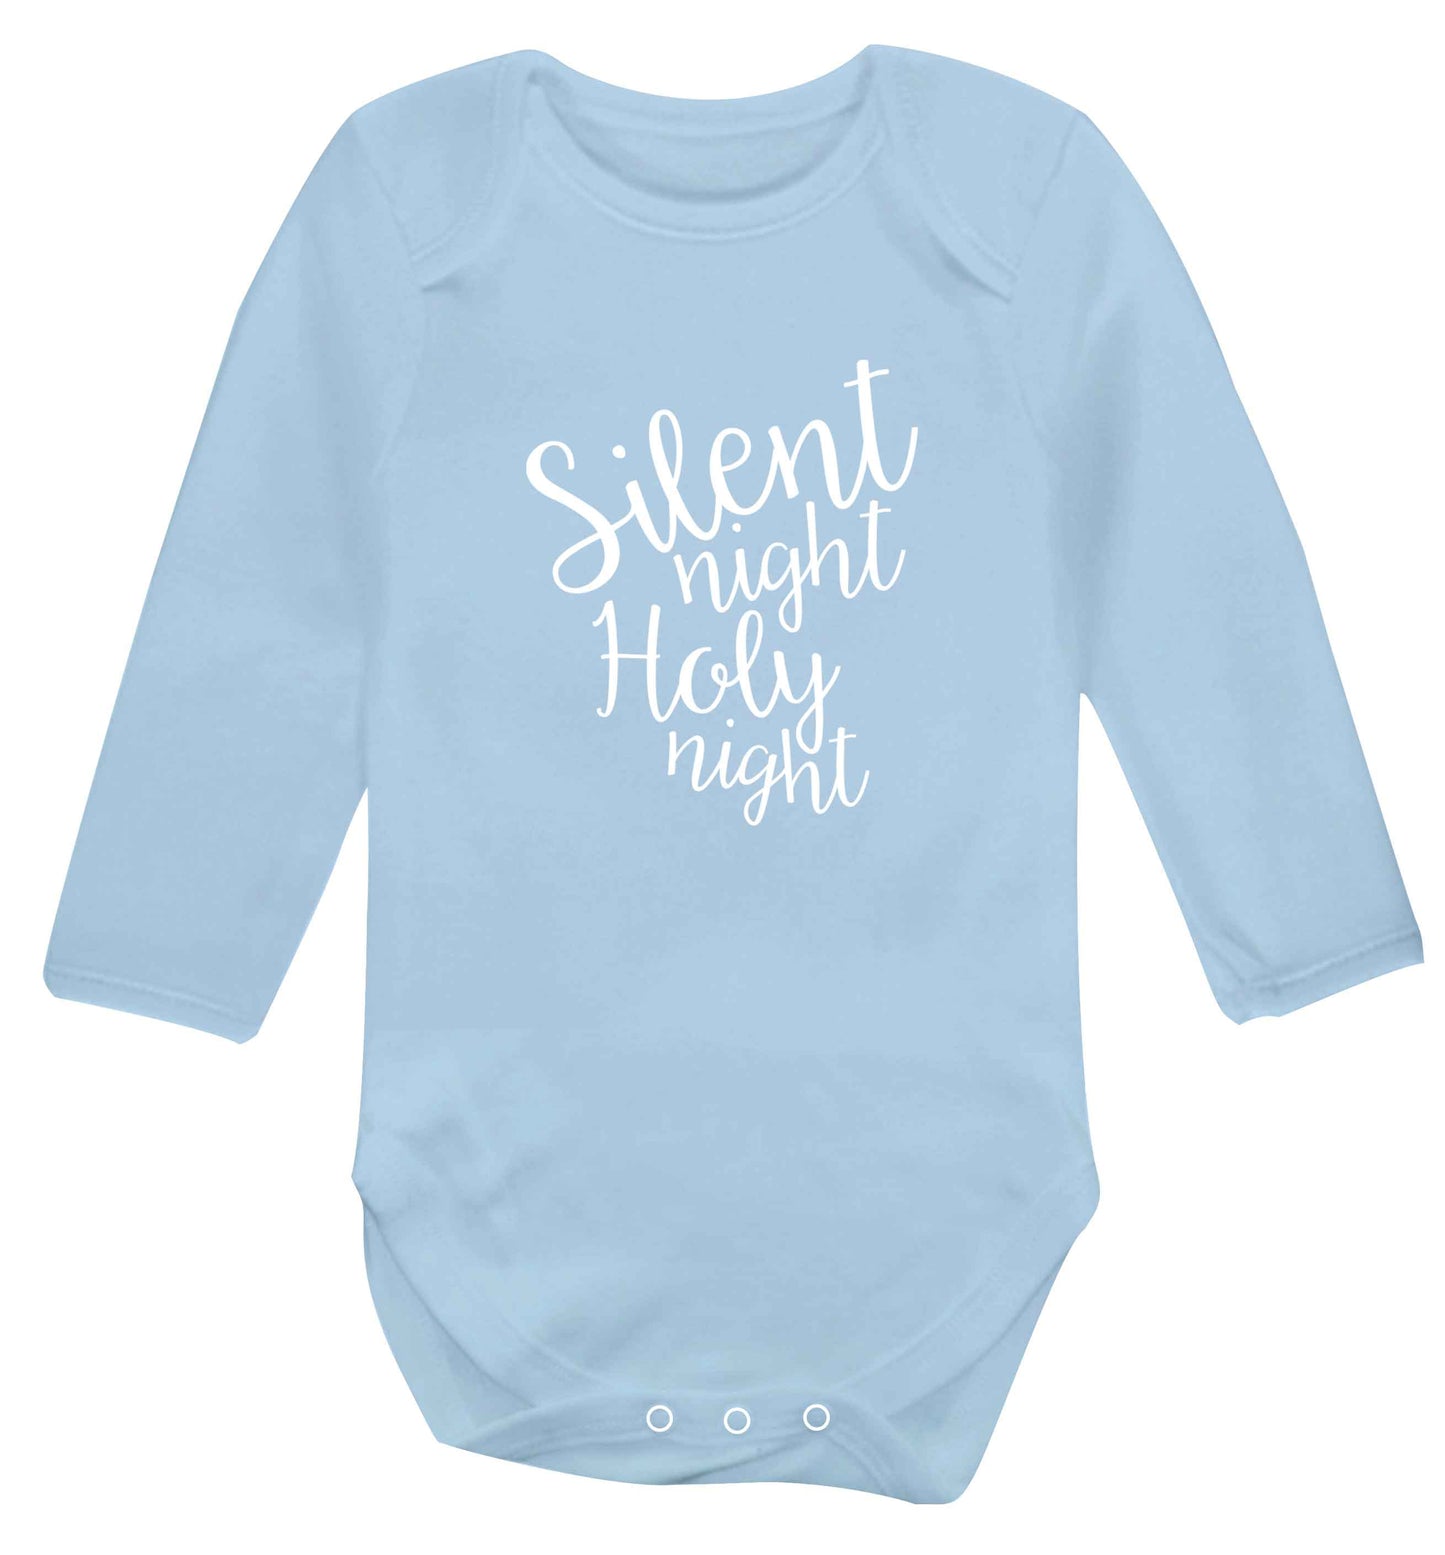 Silent night holy night baby vest long sleeved pale blue 6-12 months